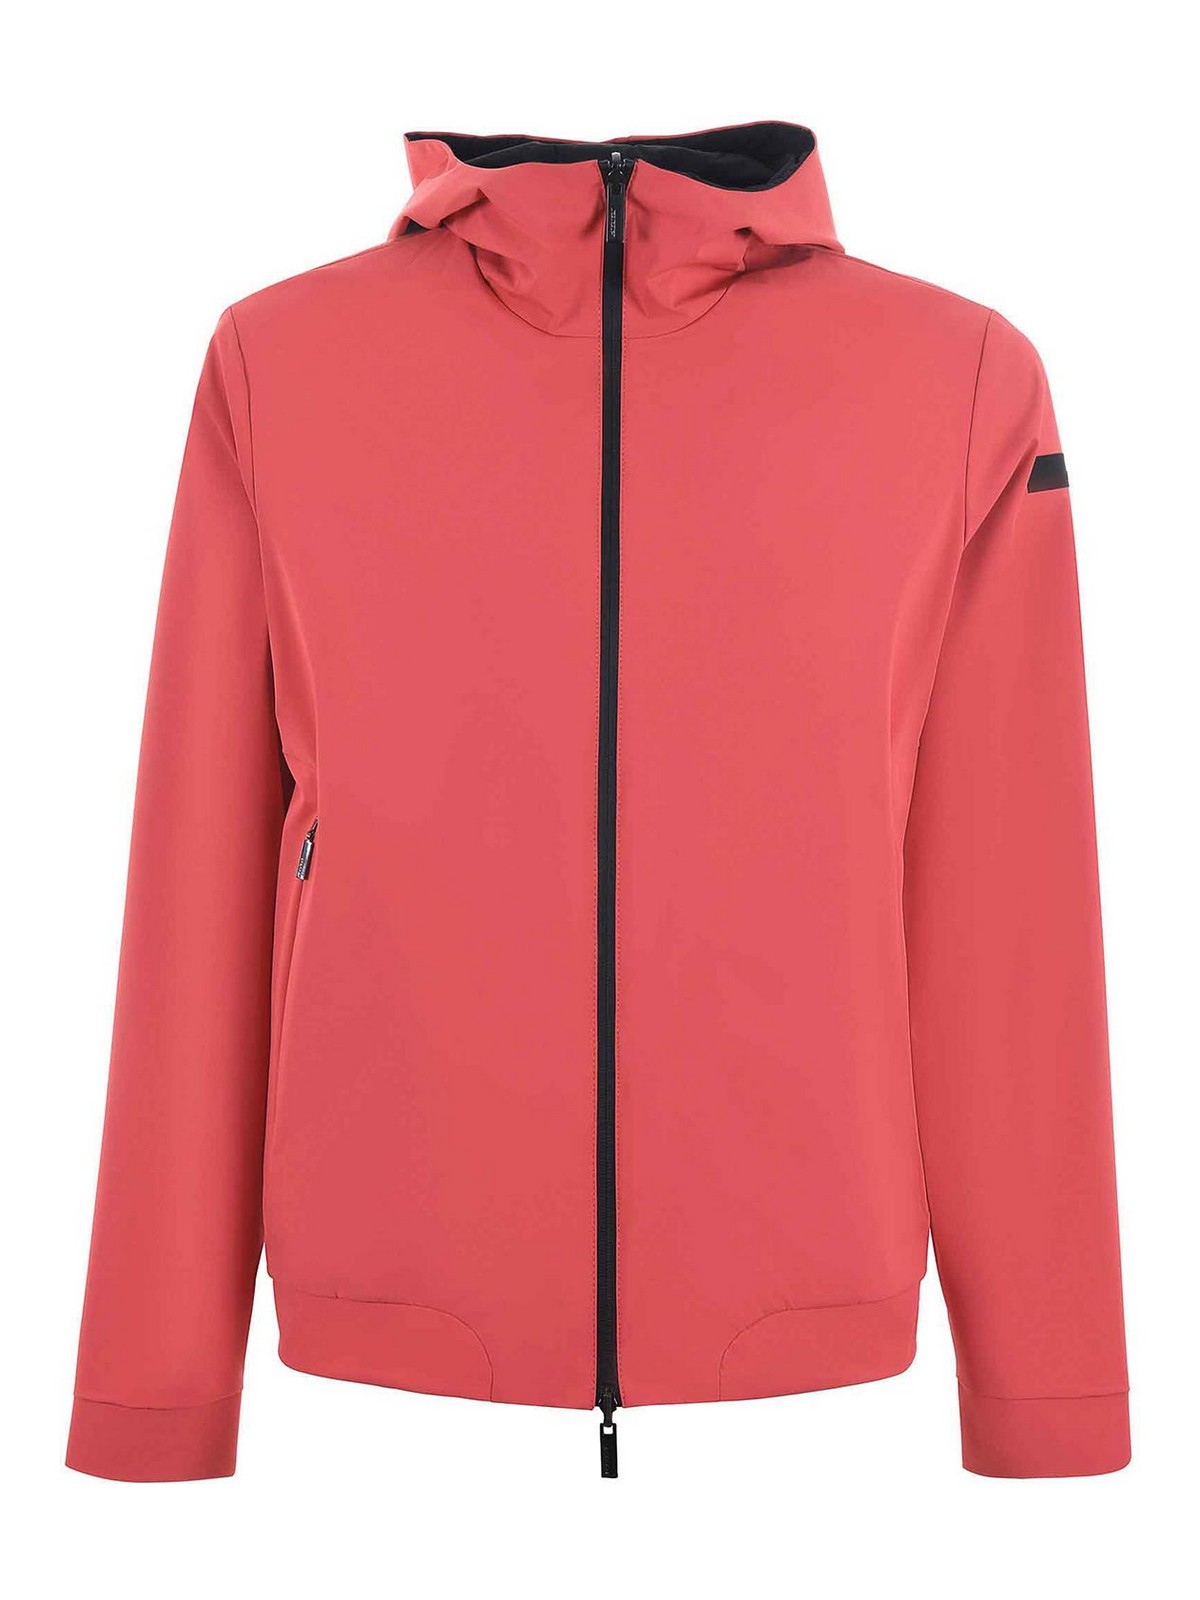 Rrd Roberto Ricci Designs Reversible Jacket In Red